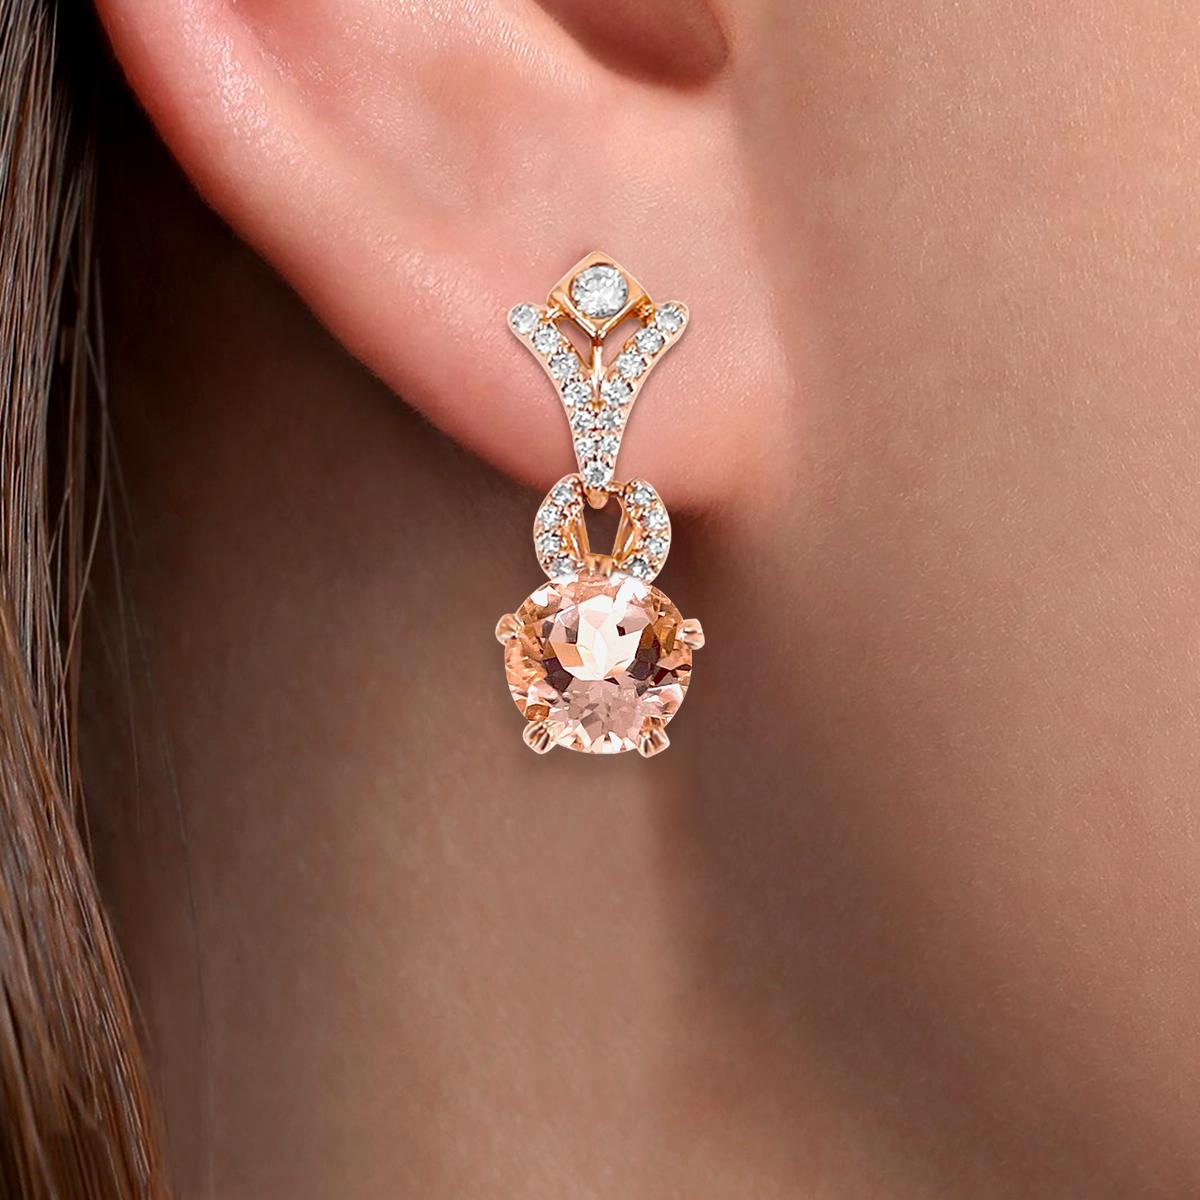 Modern 14K Rose Gold 3.54cts Morganite and Diamond Earring, Style# E5207MO For Sale